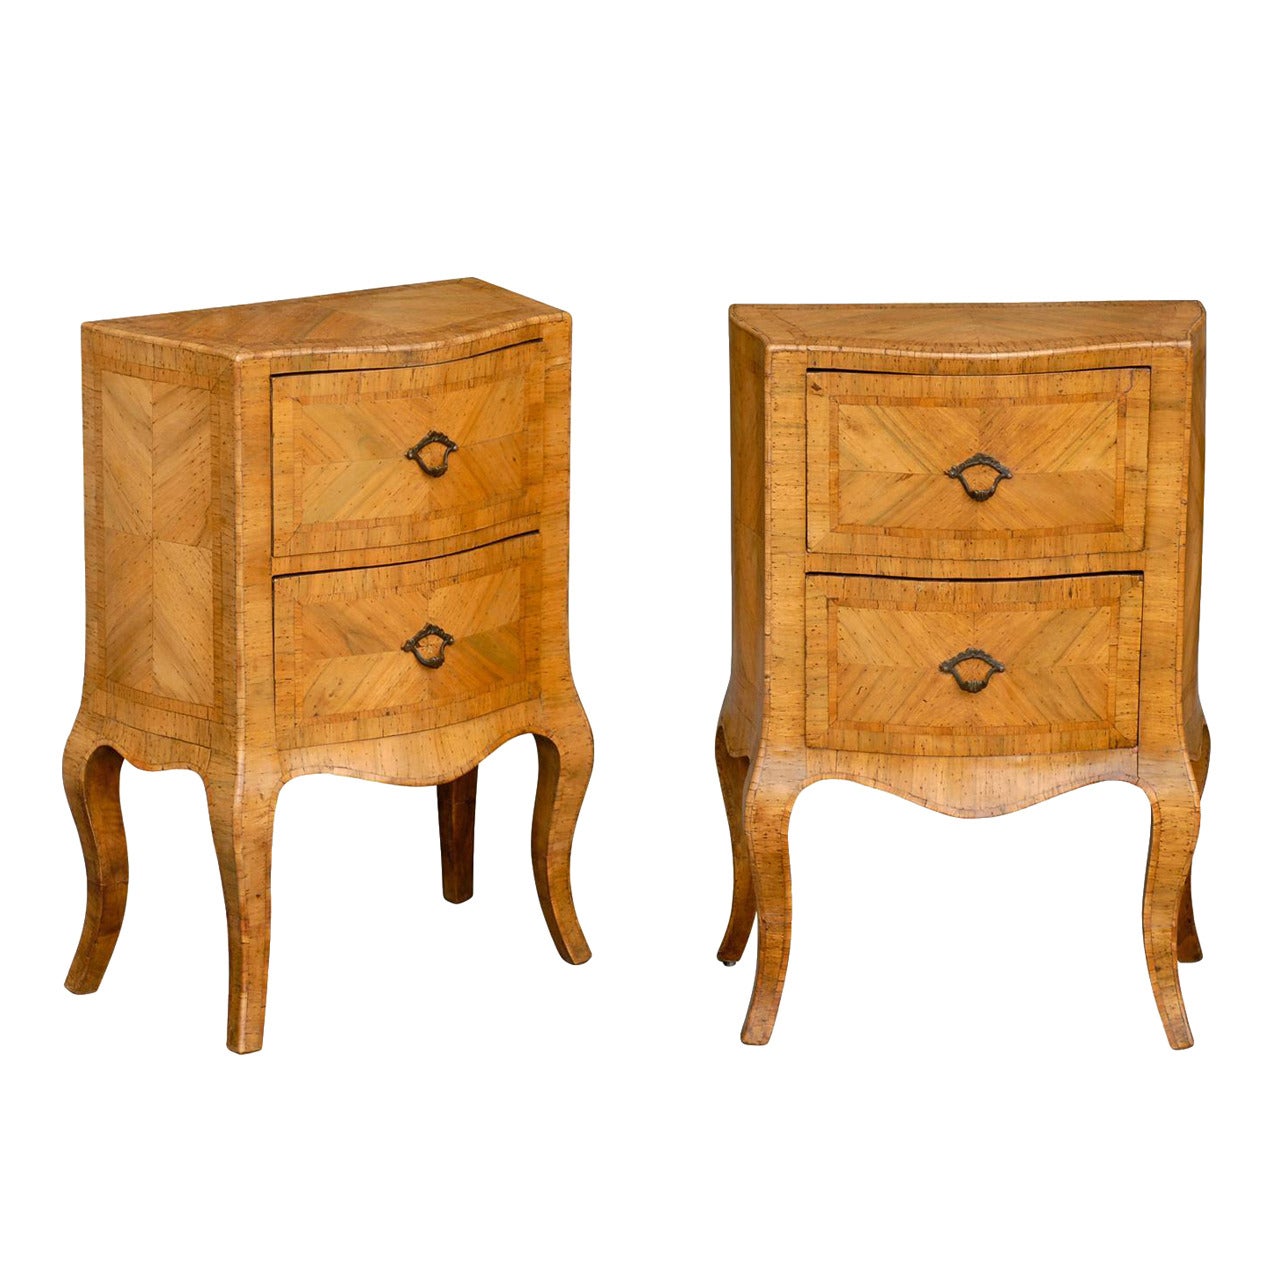 Pair of 19th Century Italian Bombé Two-Drawer Commodes with Marquetry Veneer